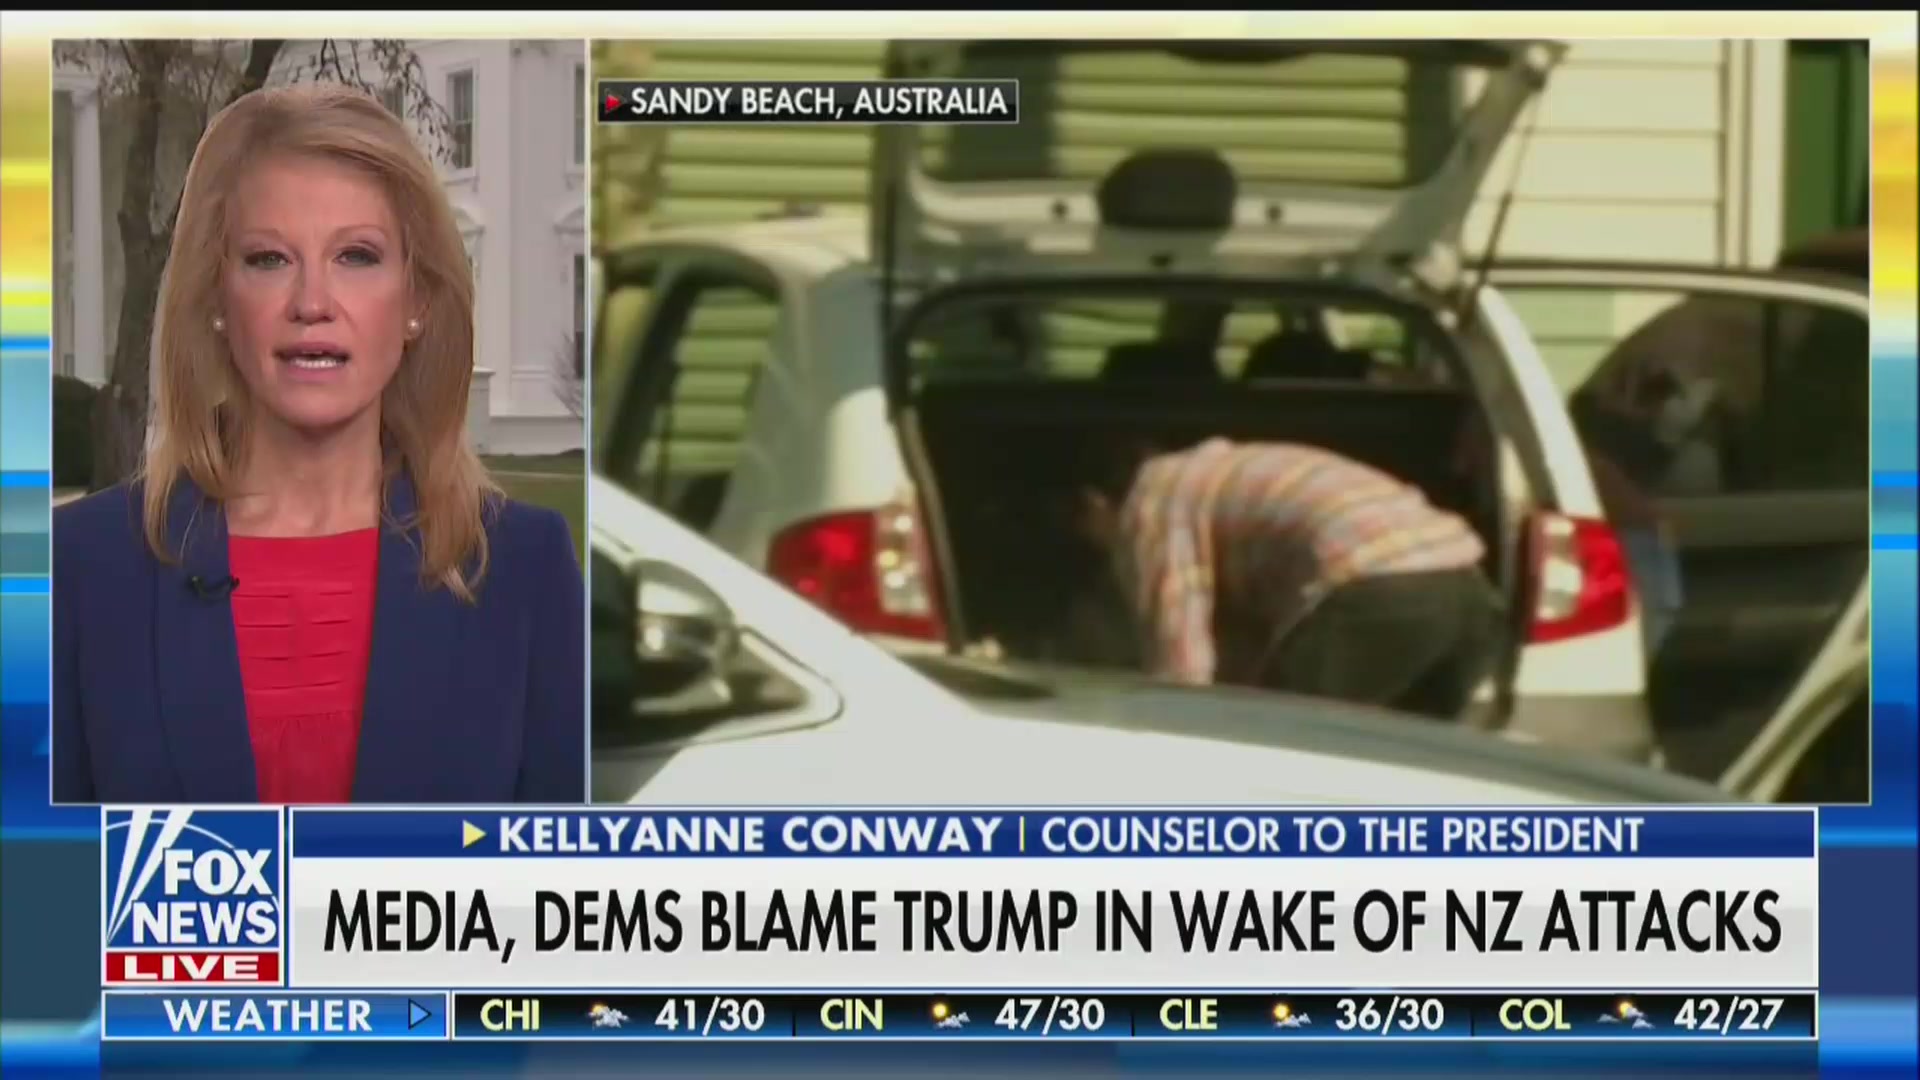 Kellyanne Conway Calls on Fox Viewers to Read New Zealand Shooter’s ‘Entire’ Racist Manifesto